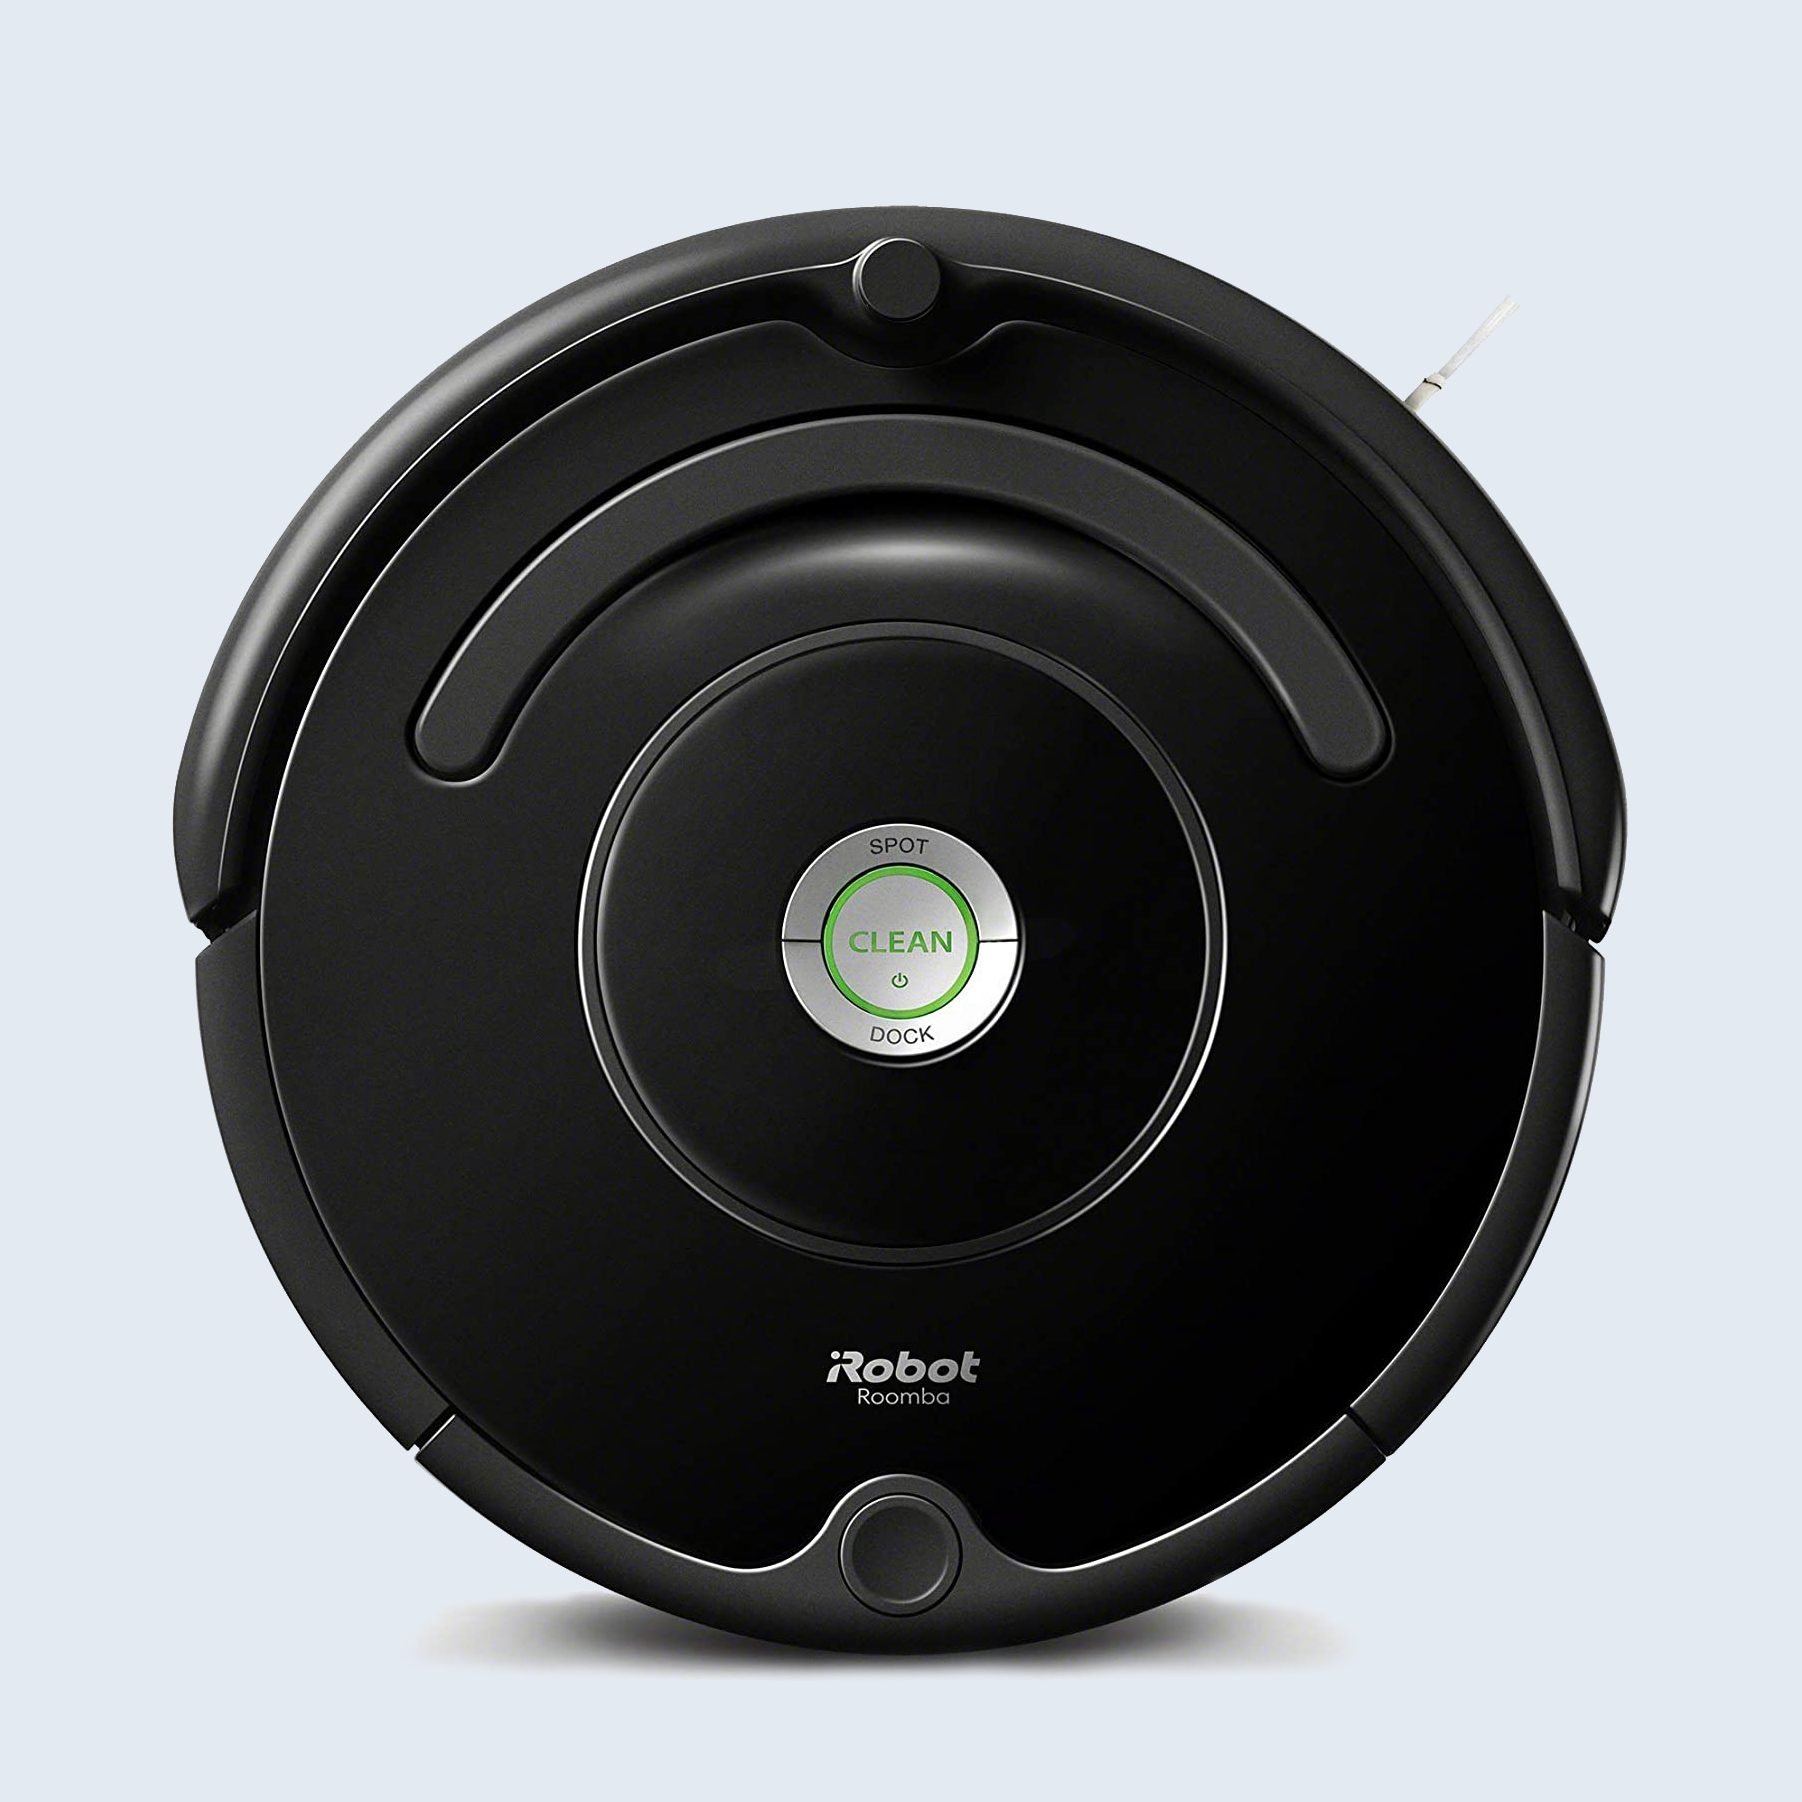 7 Best Robot Vacuums 2022 Reviews of Roomba, Eufy, Shark & More